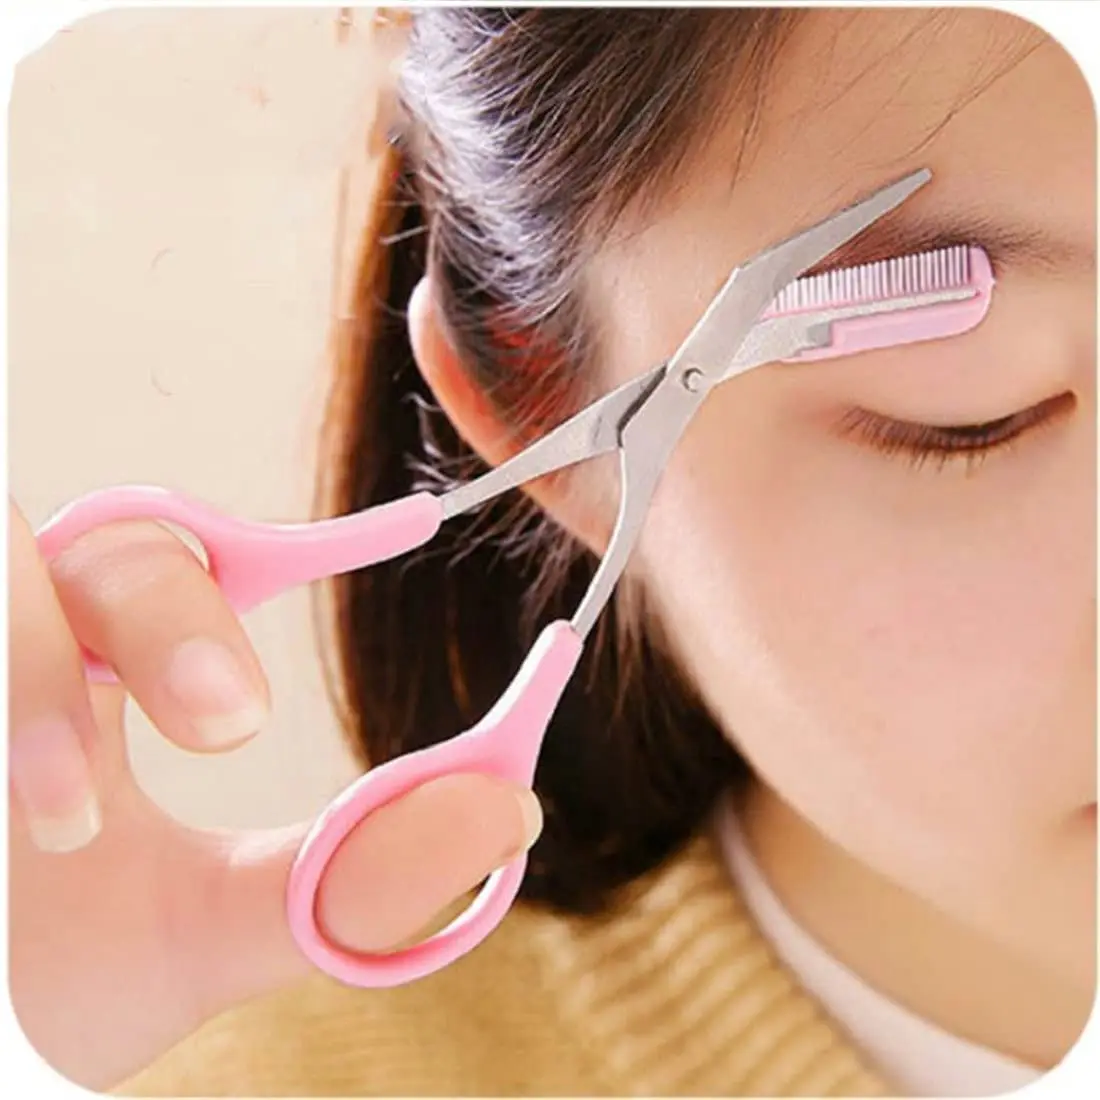 

Eyebrow Scissors Trimmer Scissors Comb Eyebrow Shaping Cut Comb Scissors Non Slip Finger Grips Hair Removal Beauty Accessories